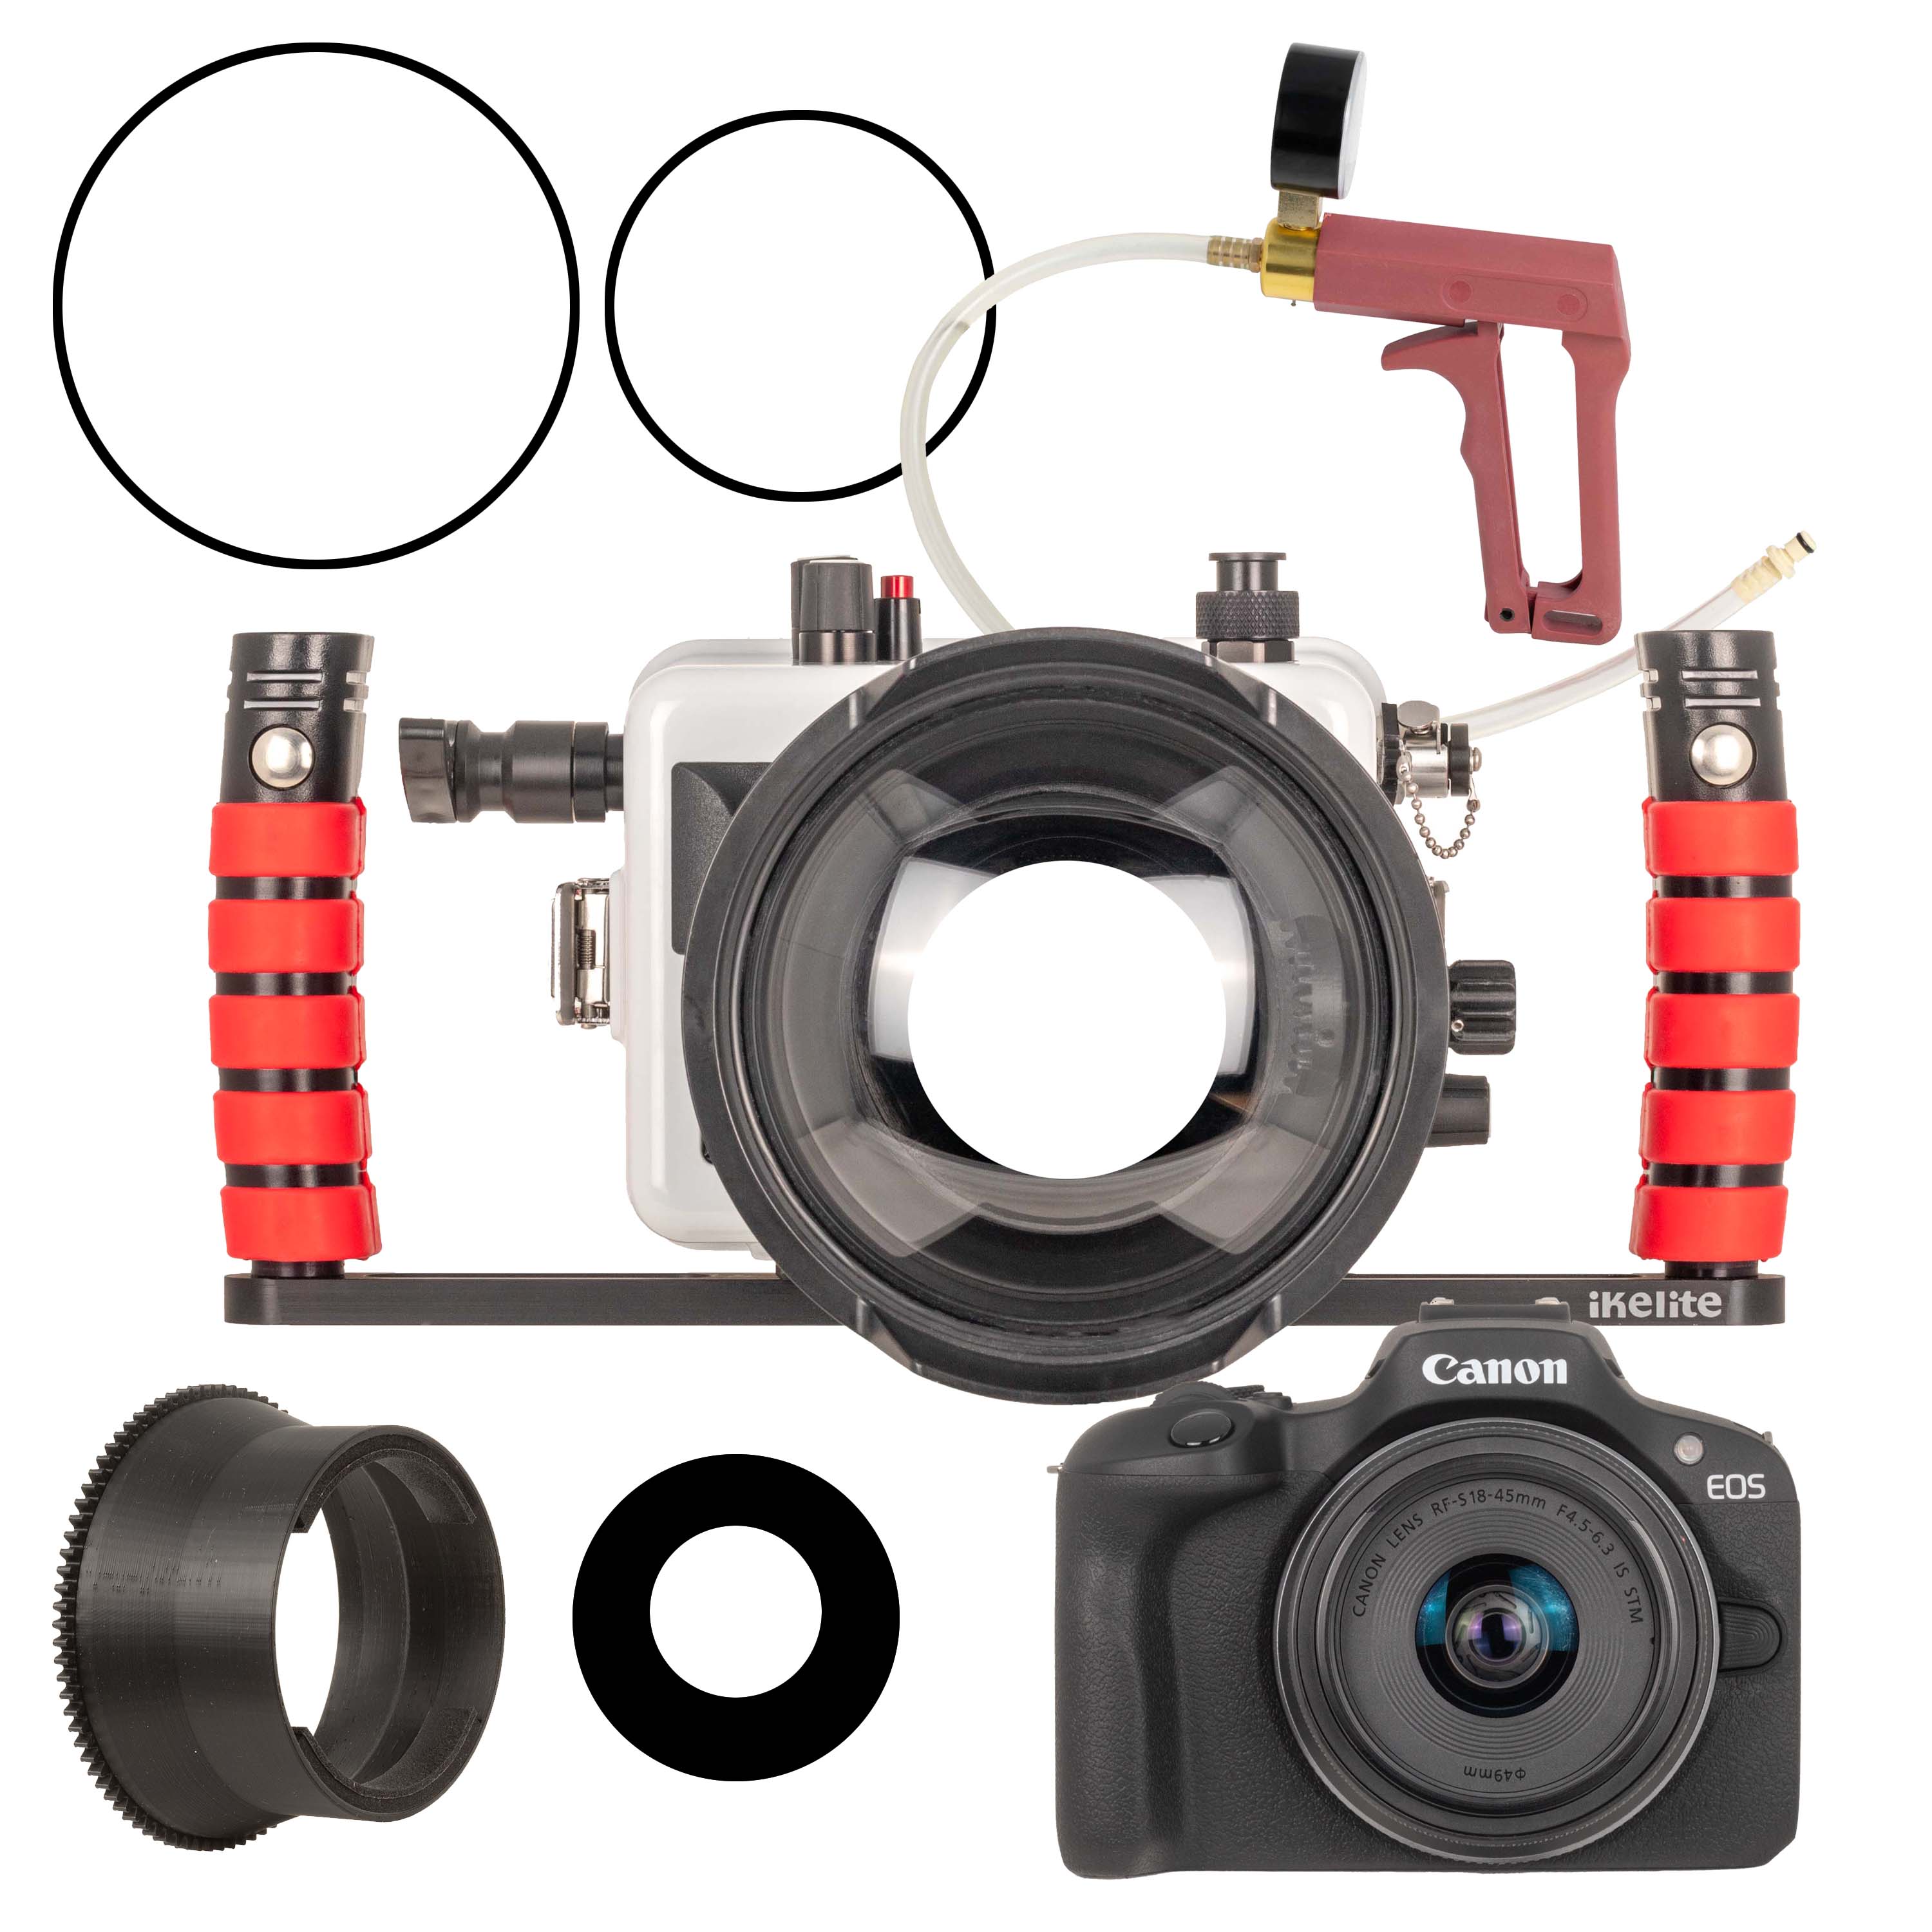 200DLM/D Underwater Housing and Canon EOS R100 Camera Deluxe Kit